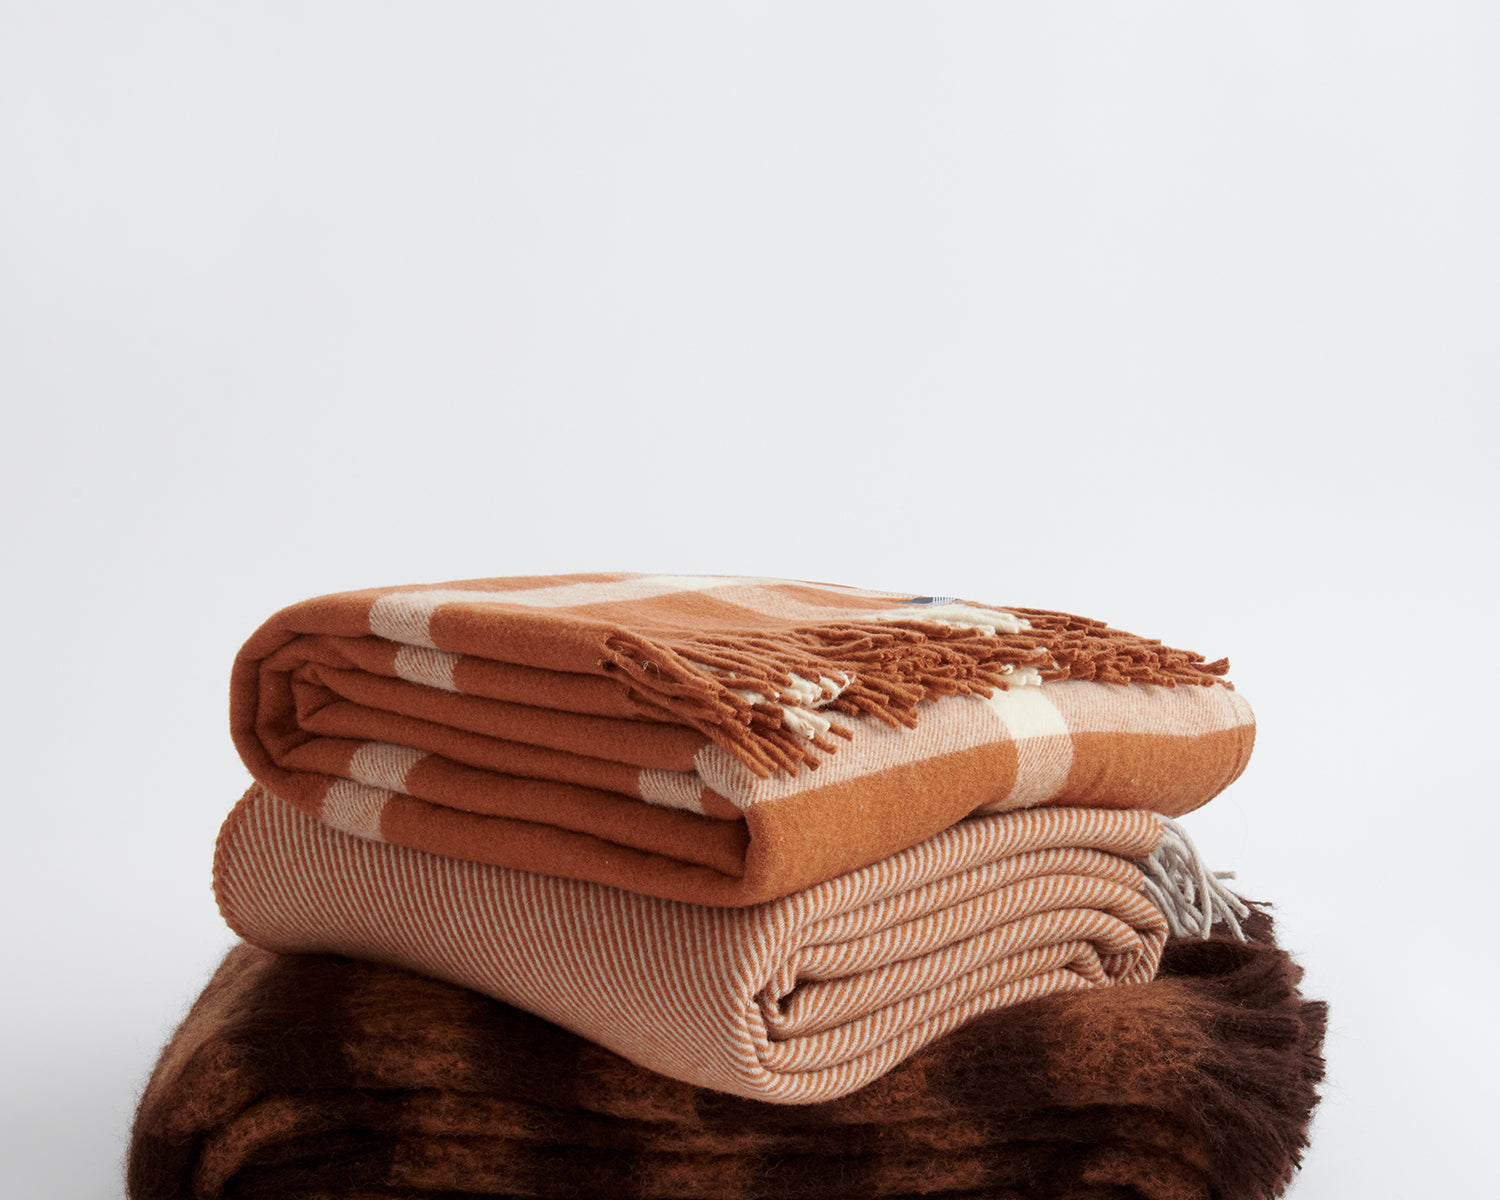 Stack of three throws including Ravine in terracotta, Diagonal in terracotta, and Rift in terracotta.